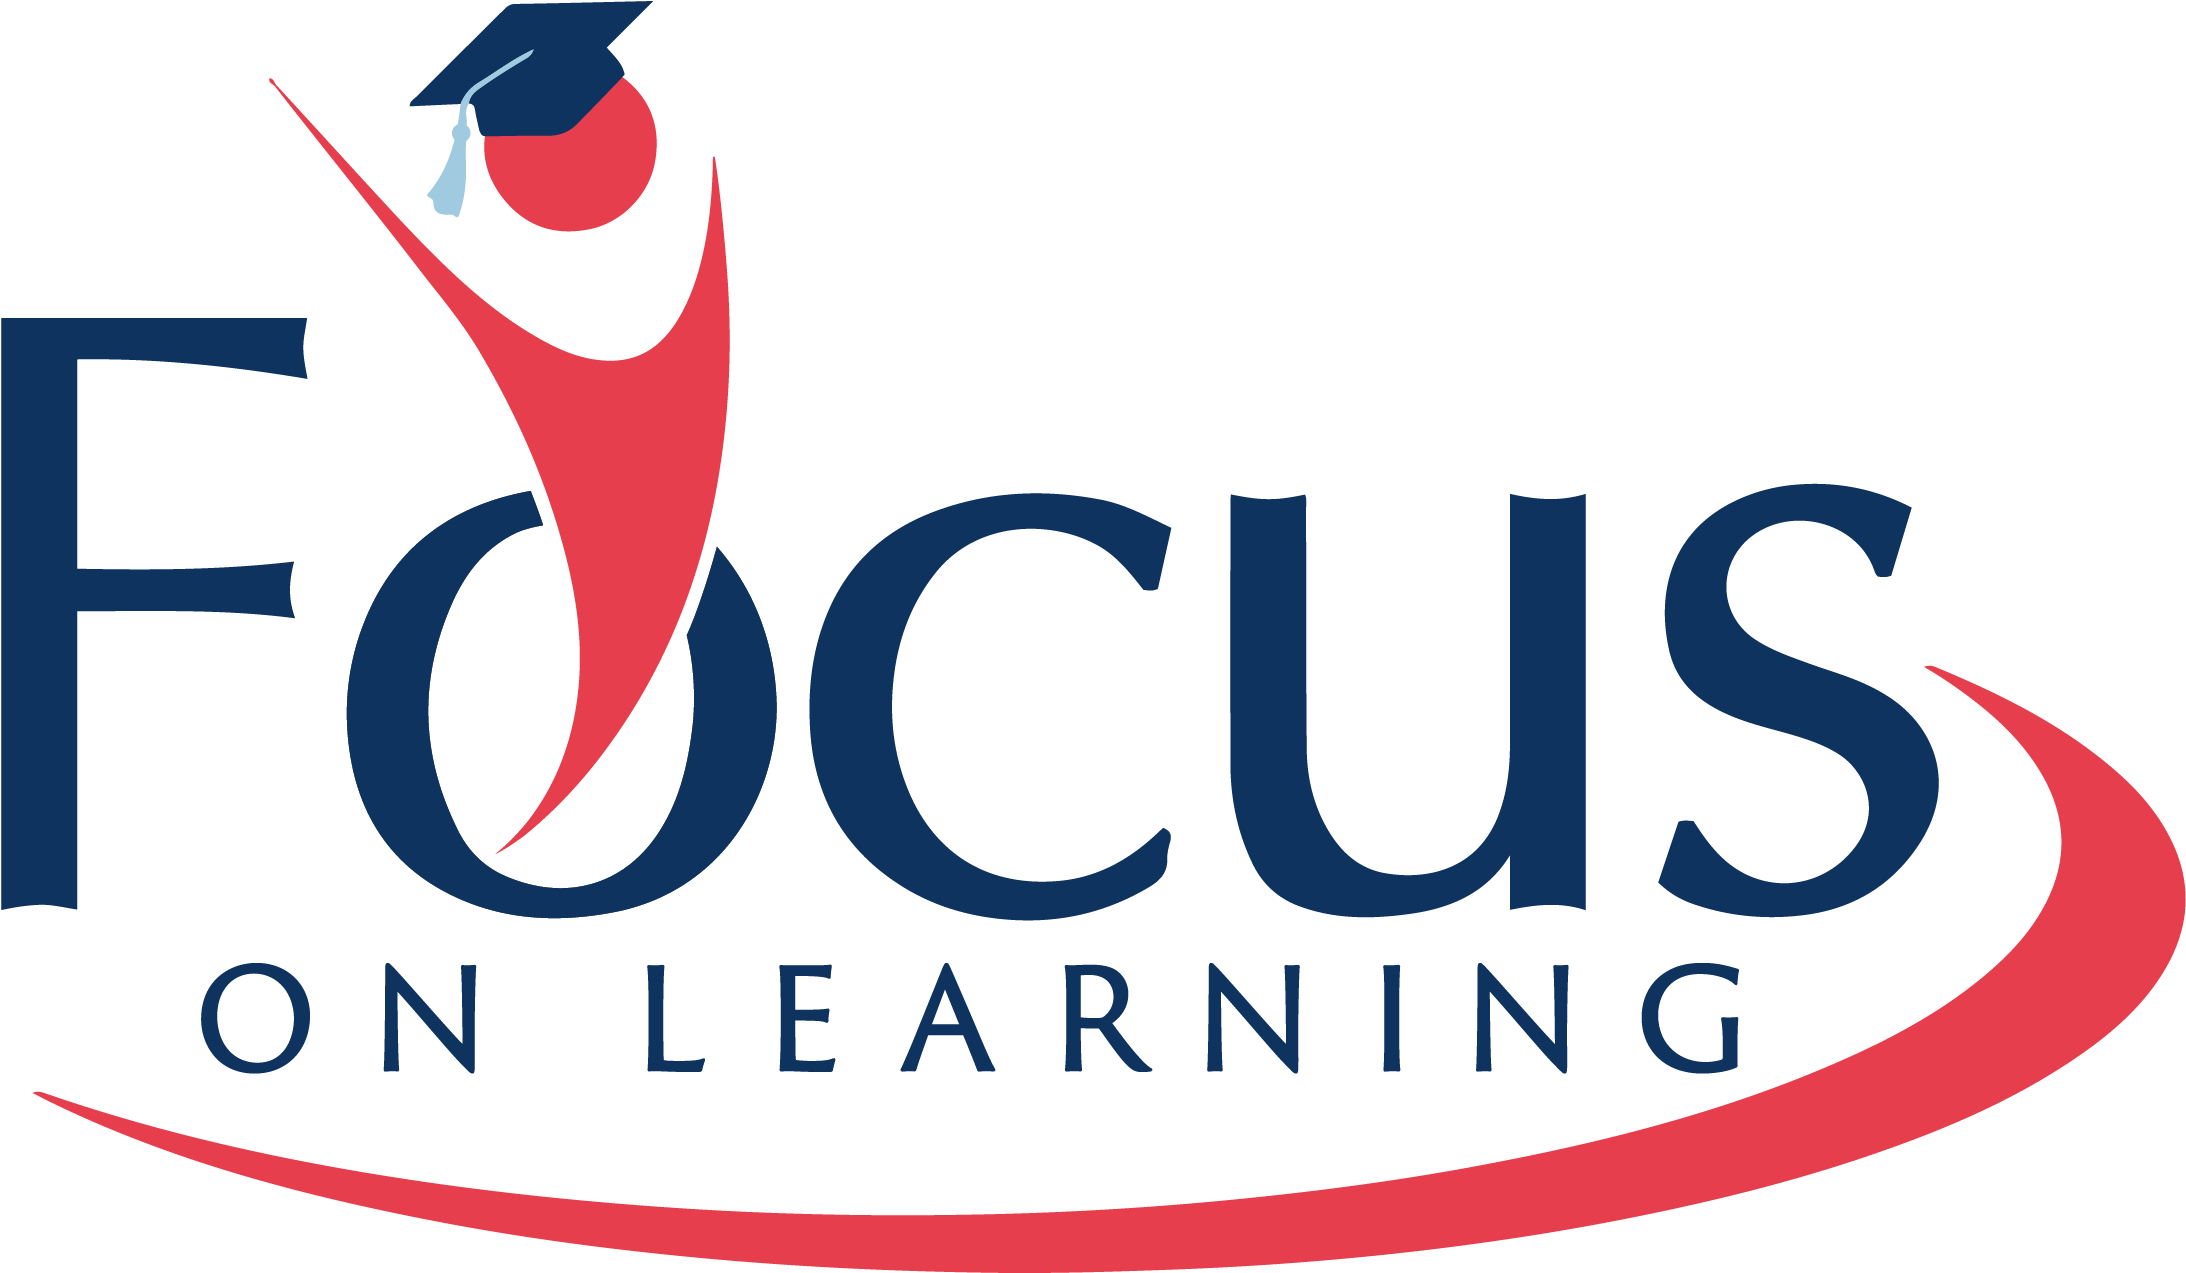 Focus On Learning Center - Lesson (2500x1701)